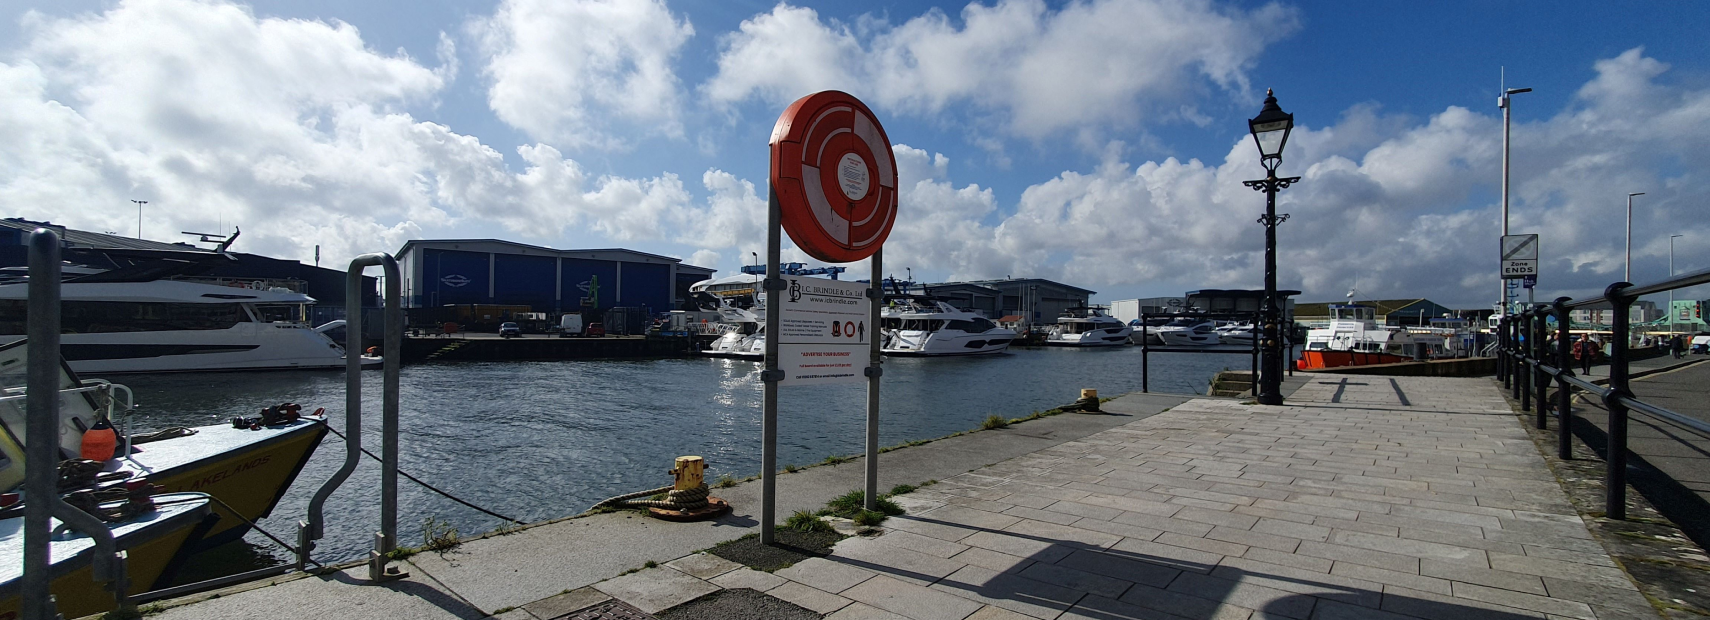 Hard Surface Lifebuoy Housing with Ad Space Signage, situated on Poole Quay, providing safety equipment and advertising opportunities in a busy waterfront setting.